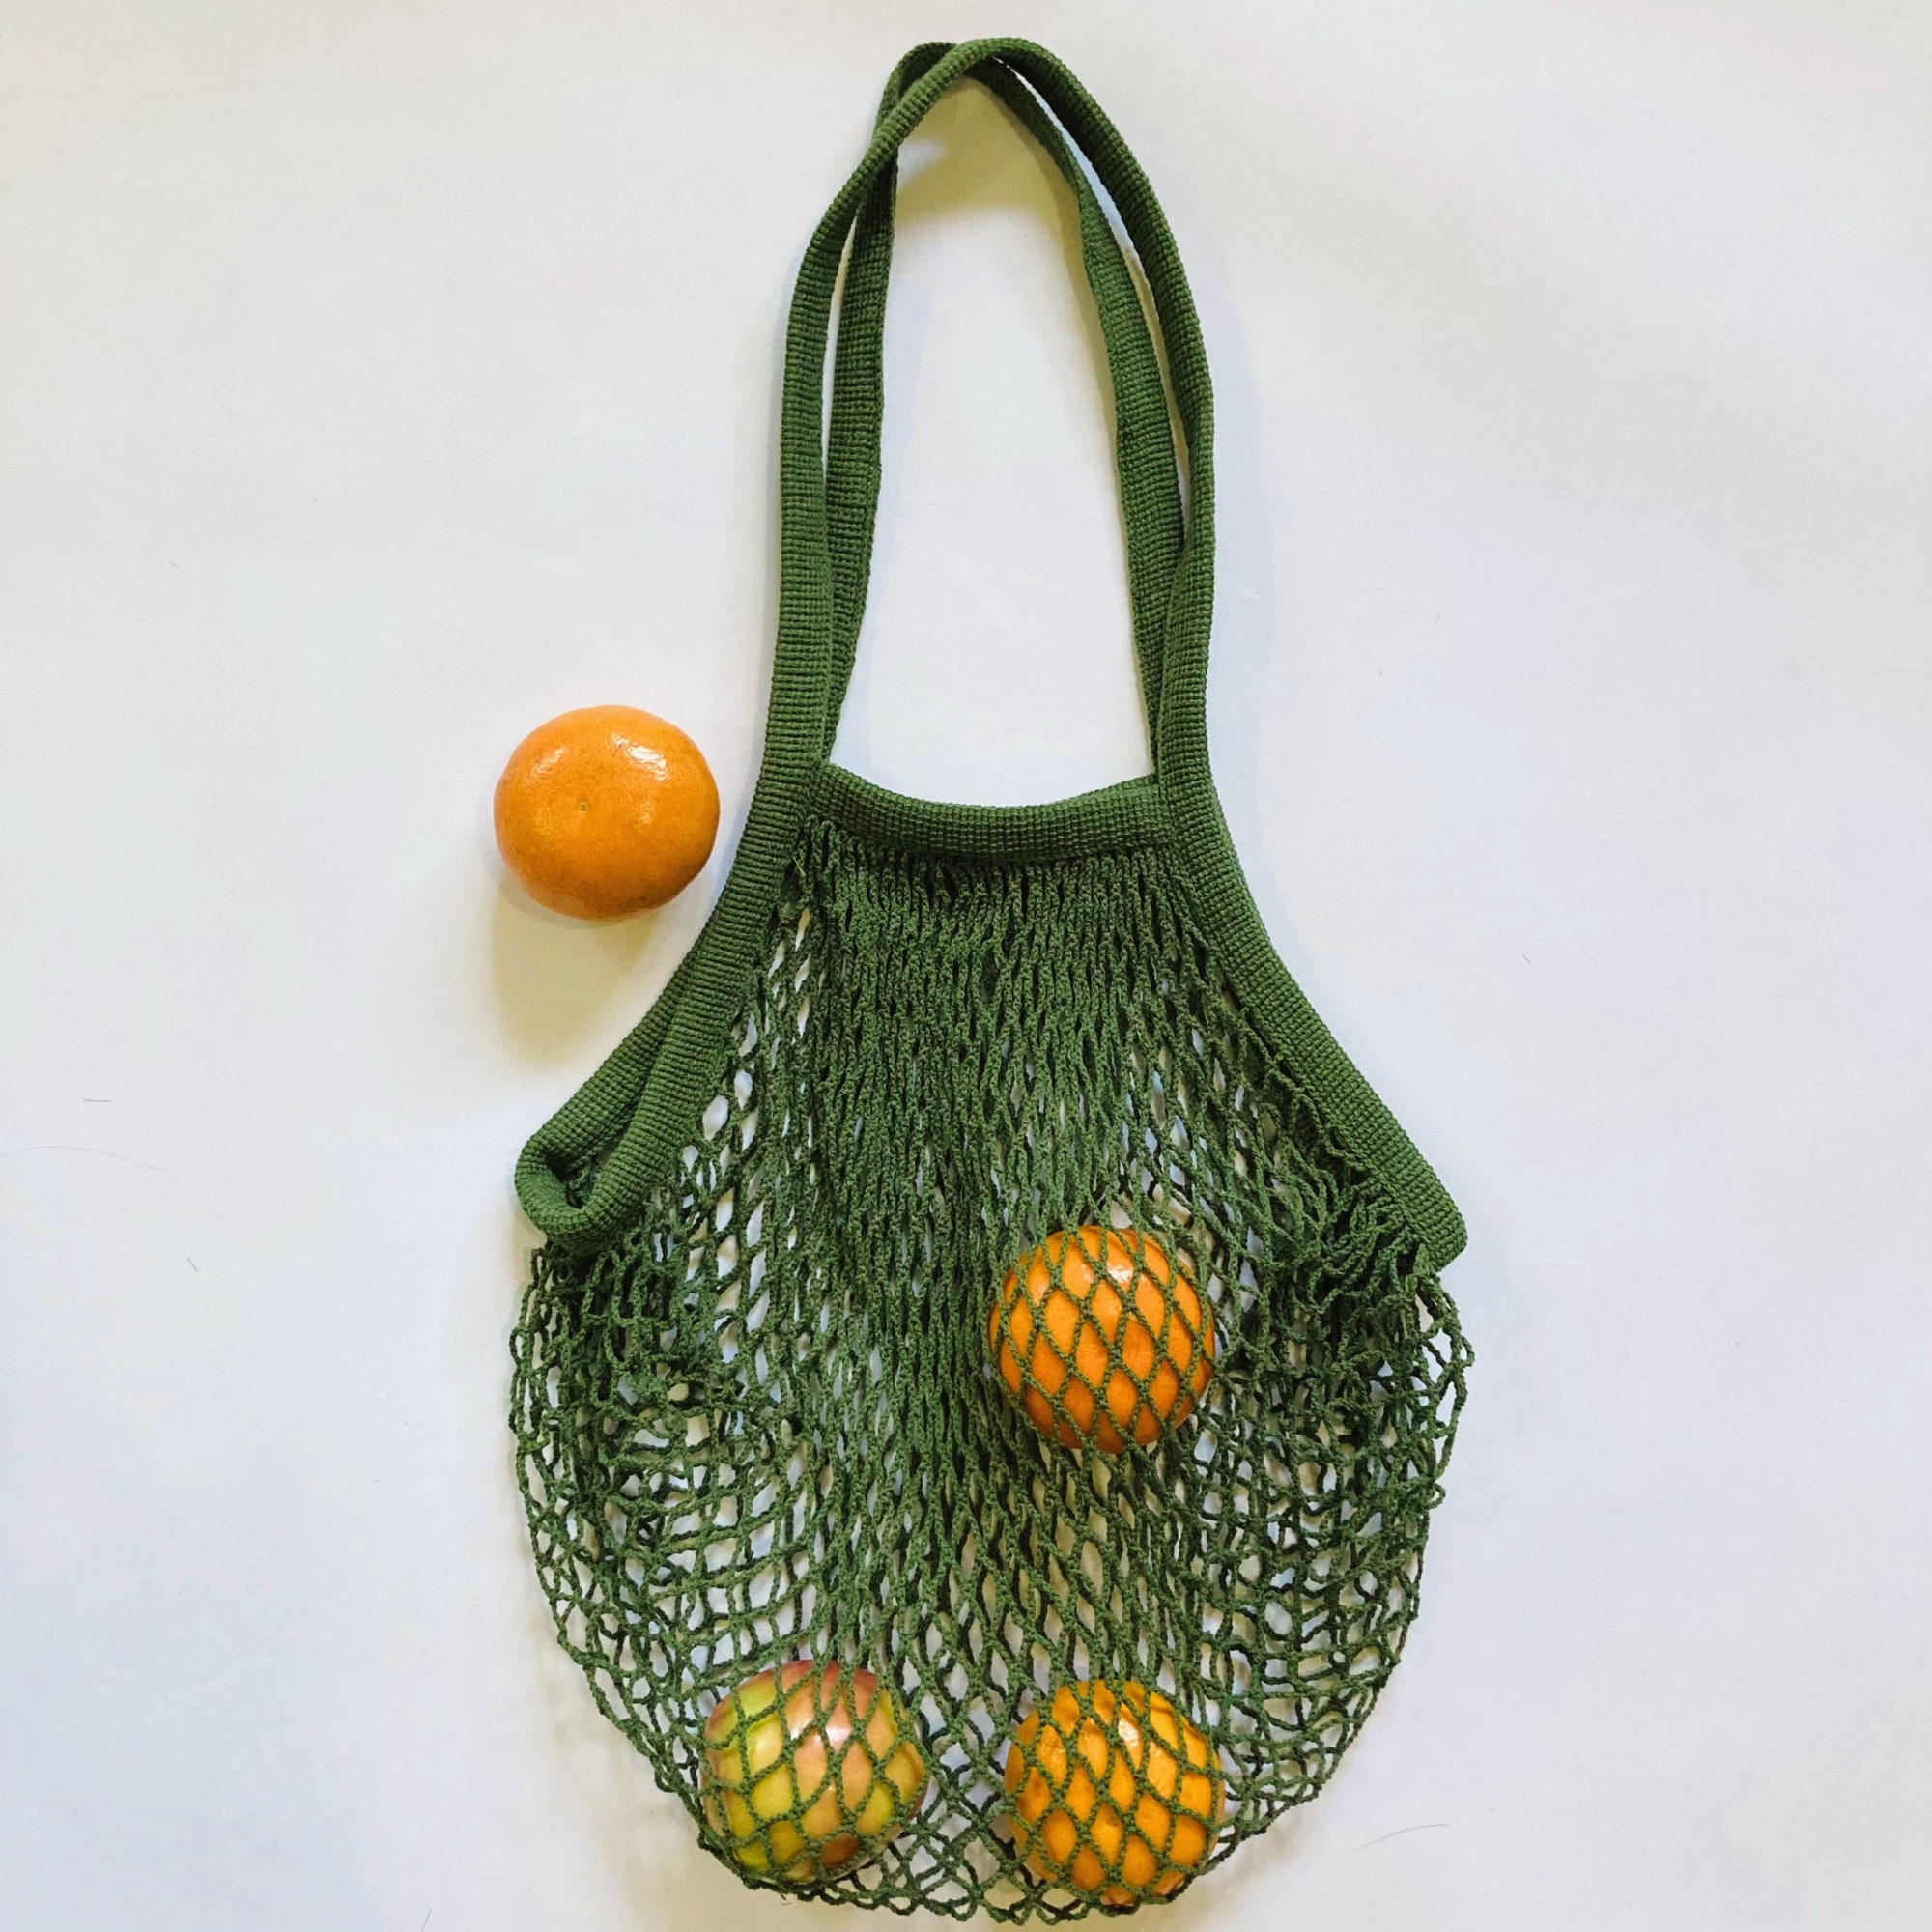 Reusable Grocery Net Bags, Cotton Mesh Tote, Farmer's Market Bags for  Fruits and Vegetables, String Shopping Organizer, Storage Bag with Long  Handles